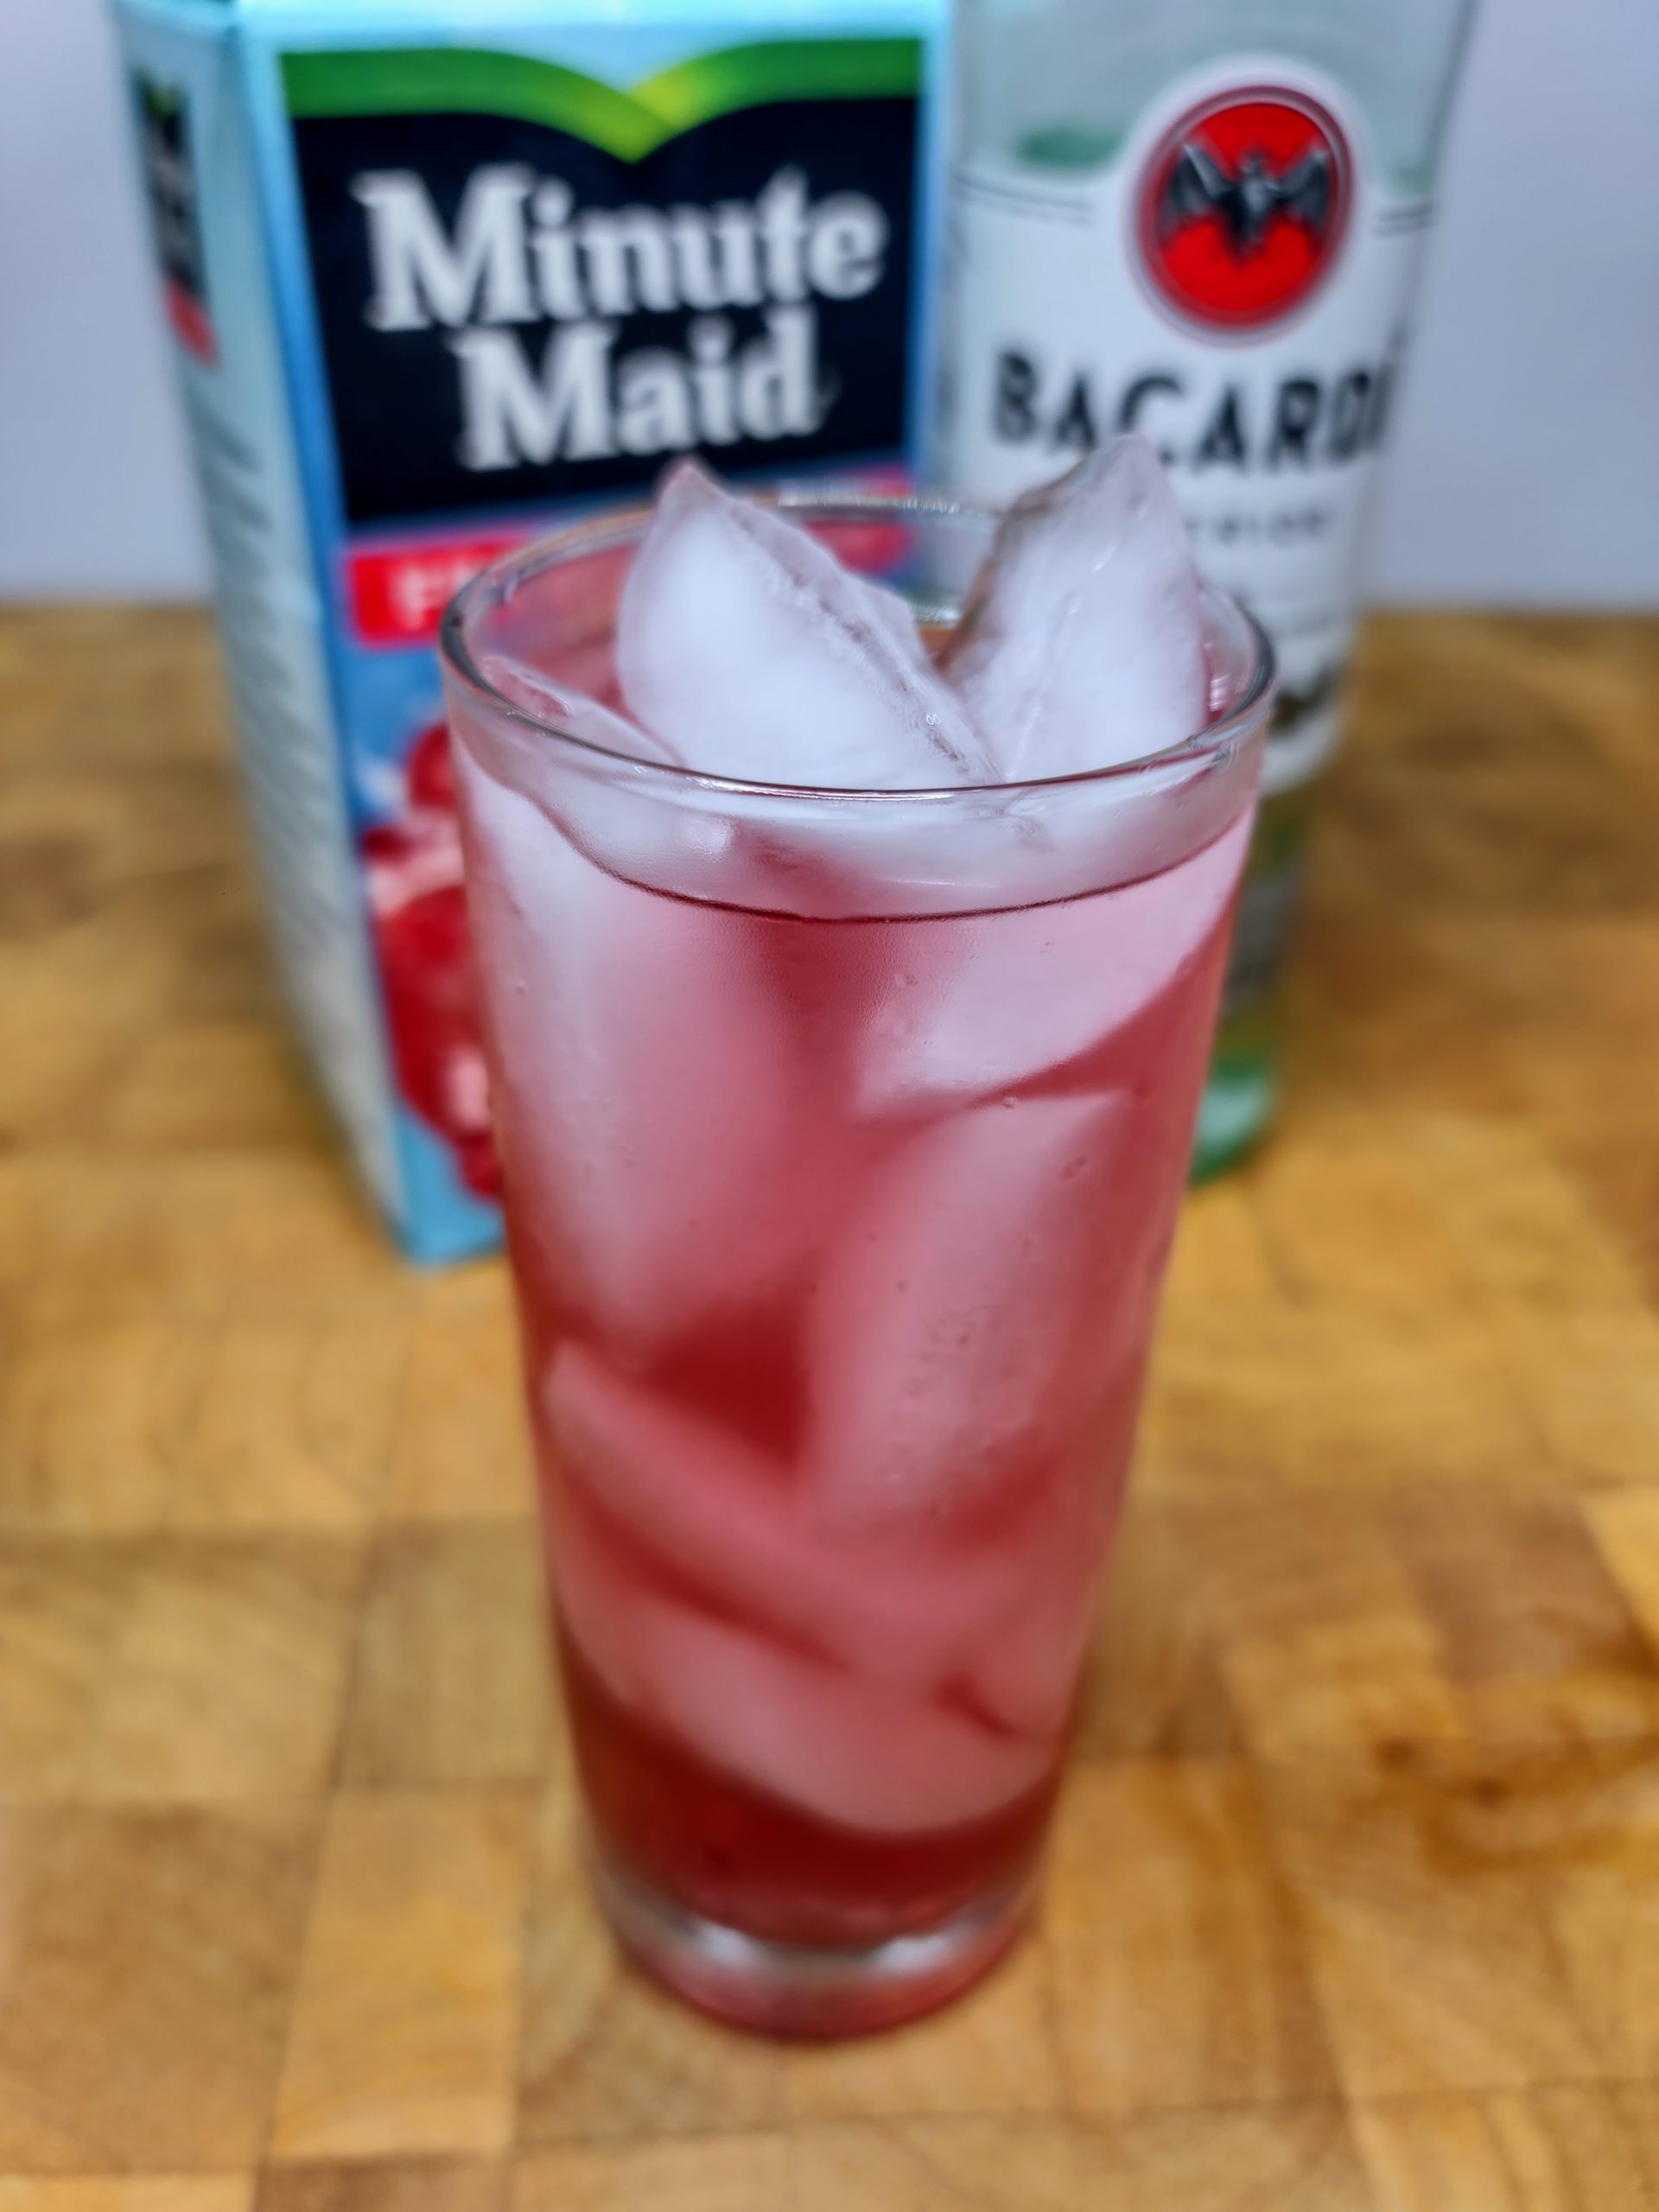 rum and fruit punch with ingredient bottles in background